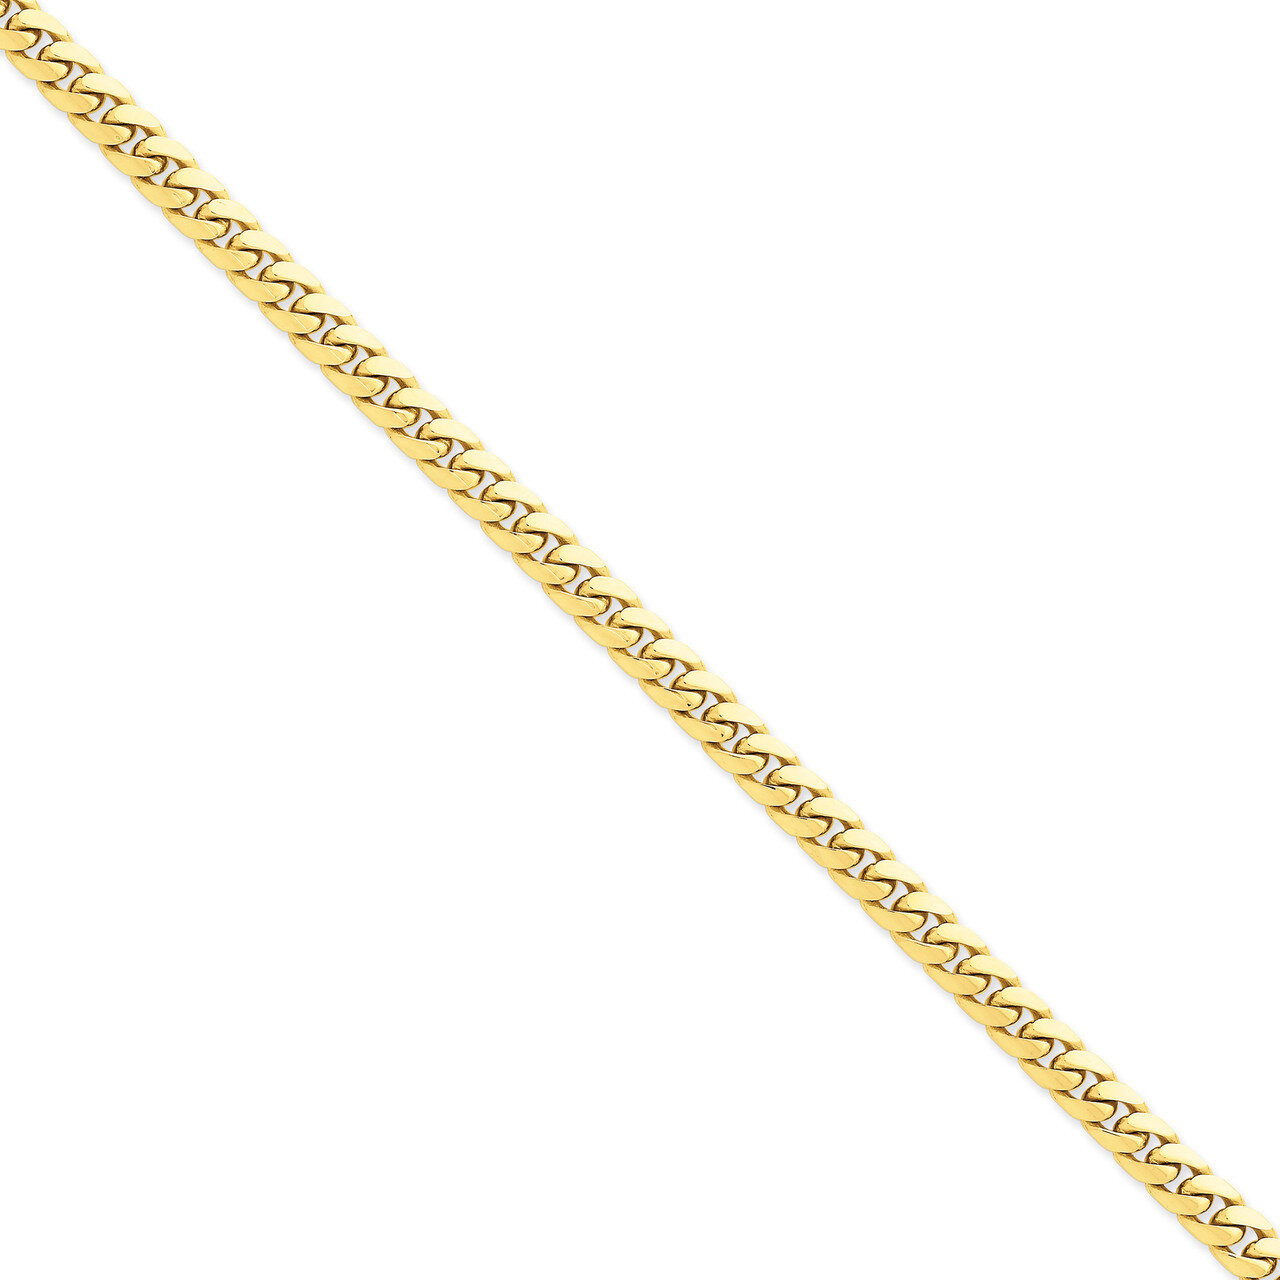 8 Inch 6.25mm Domed Curb Chain 14k Gold DCU200-8